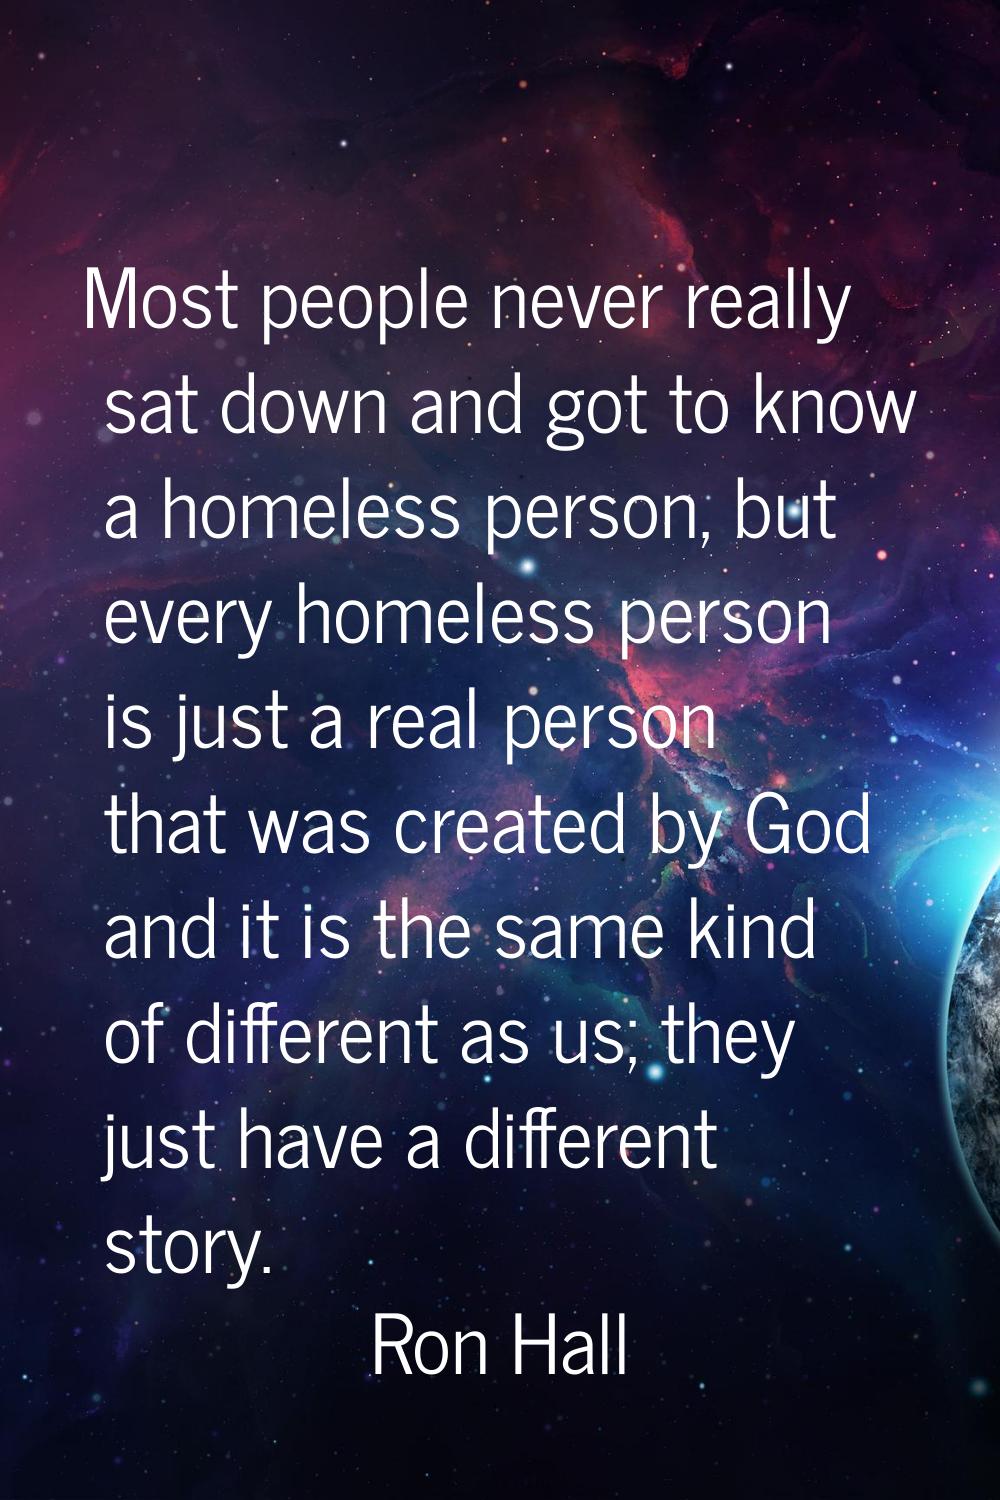 Most people never really sat down and got to know a homeless person, but every homeless person is j